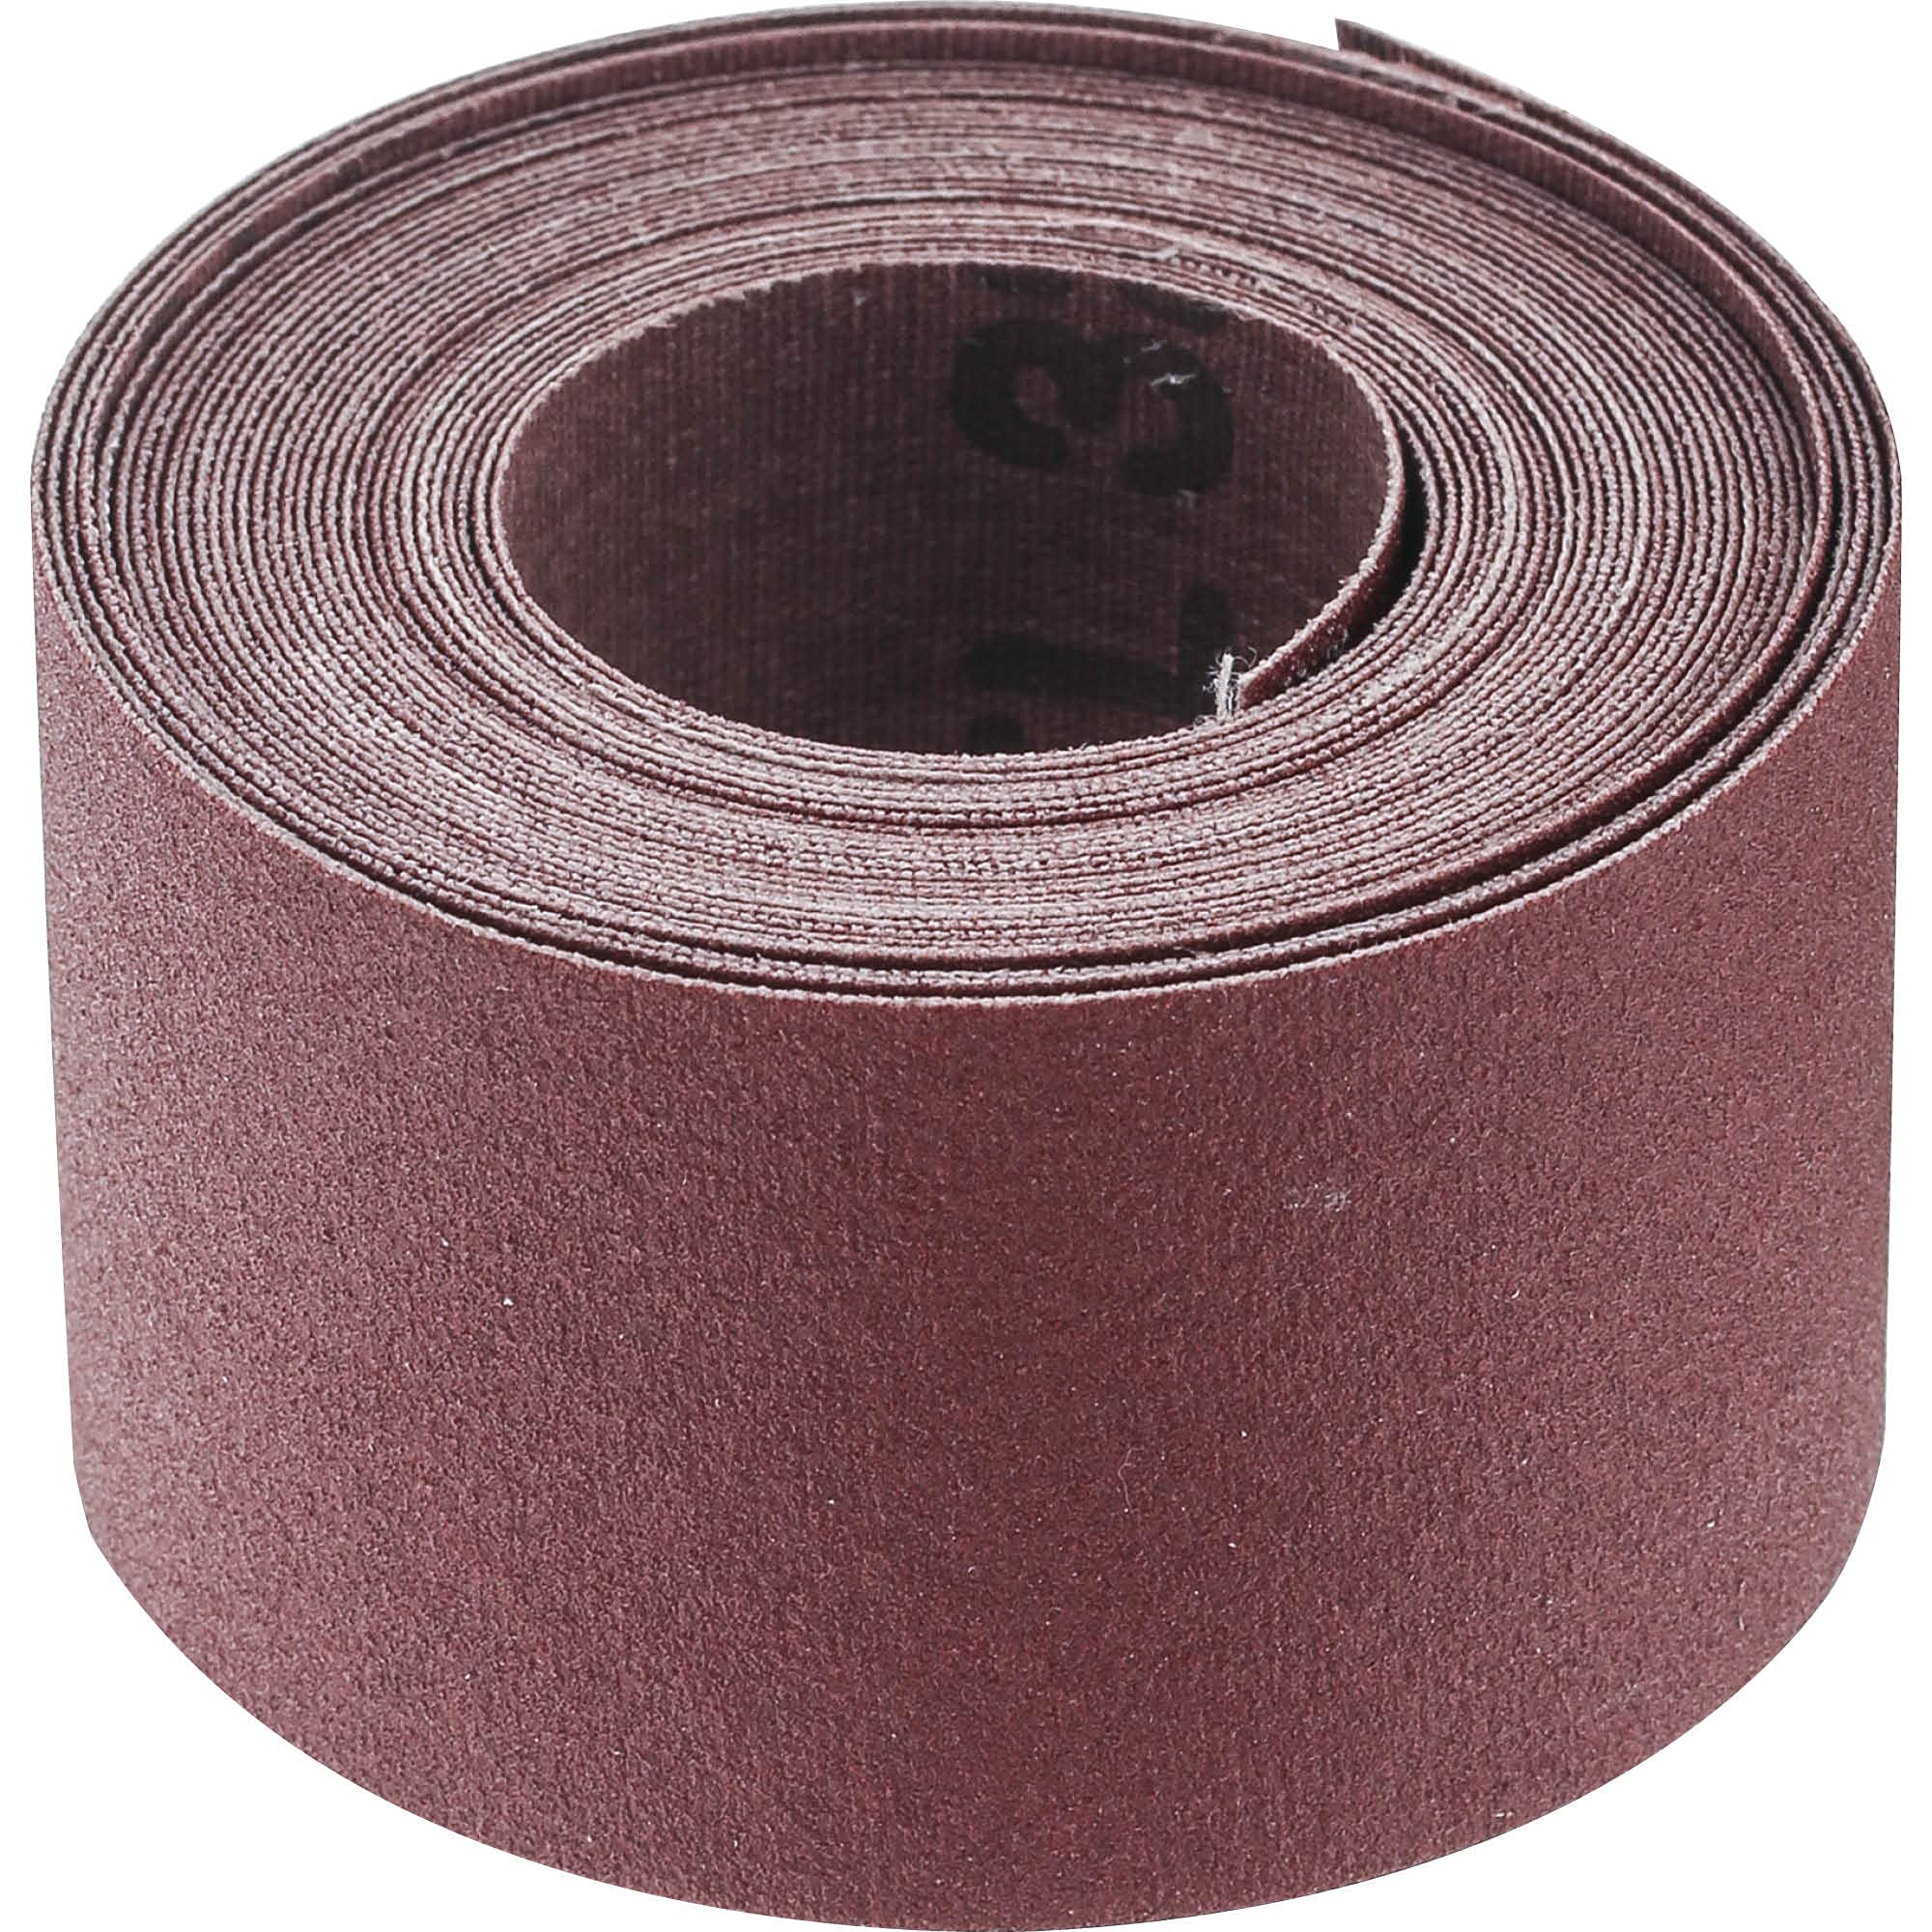 1-1/2" X 15' Steelex Emery Cloth Roll (180 Grit or 100 Grit) $3.95  + Free Shipping w/ Prime or on $25+